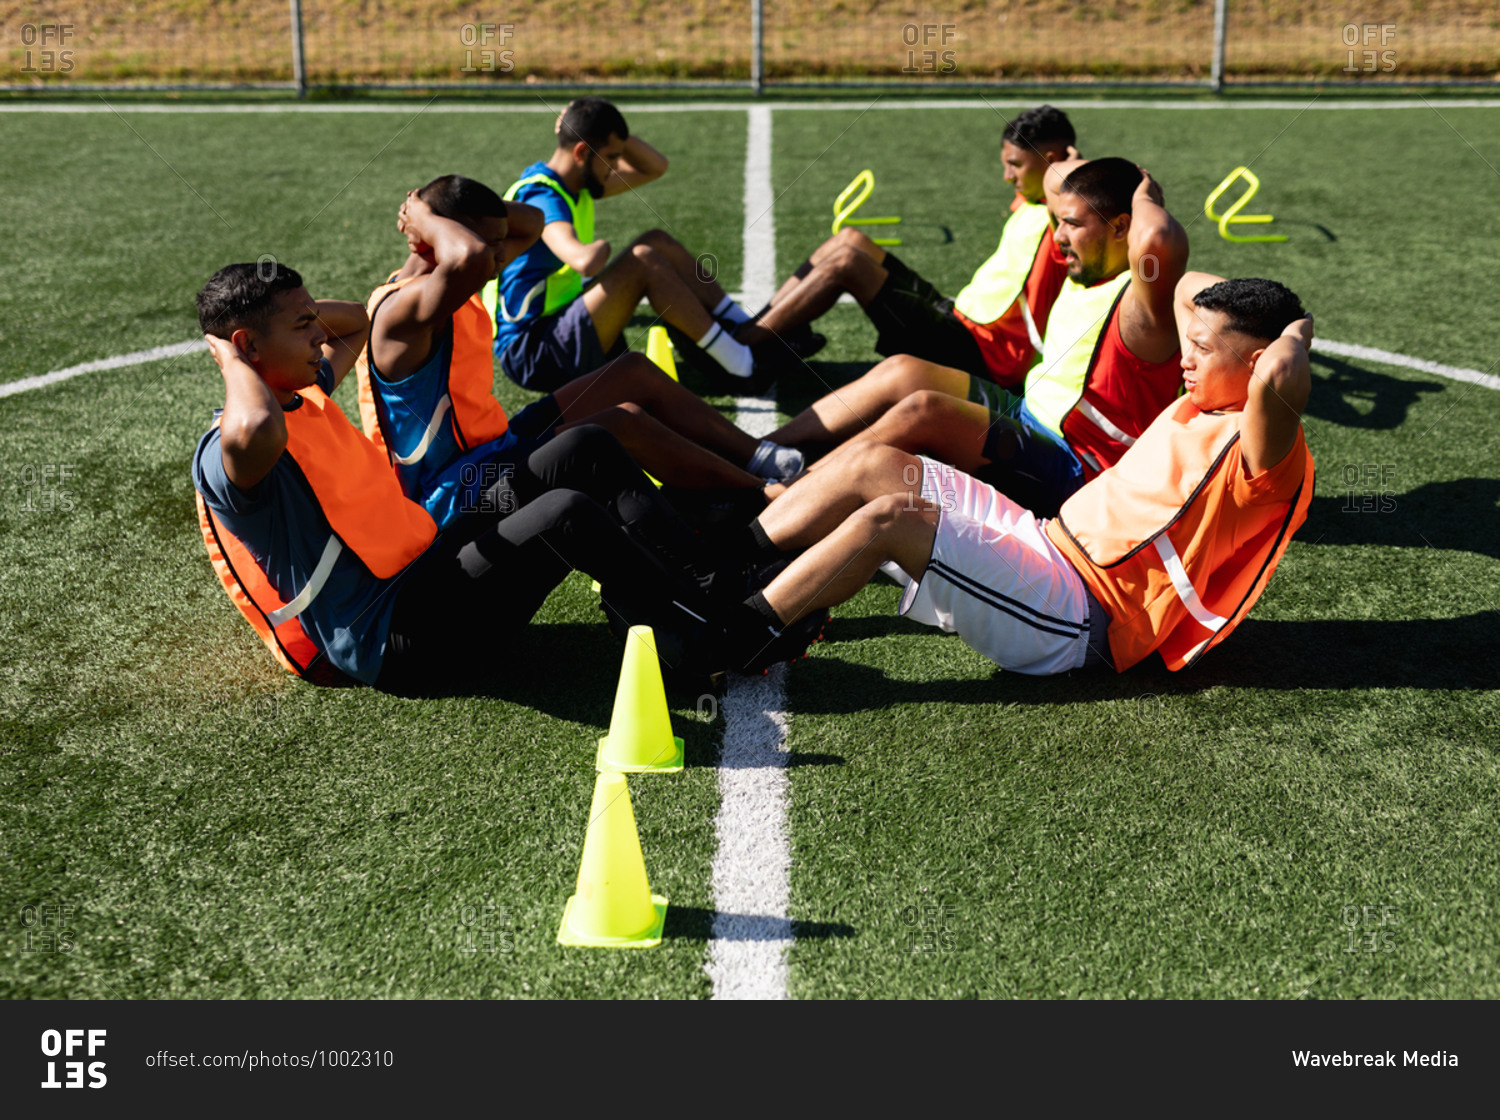 Multi ethnic group of male five a side football players wearing sports clothes and vests training at a sports field in the sun, warming up doing sit ups with cones next to them.